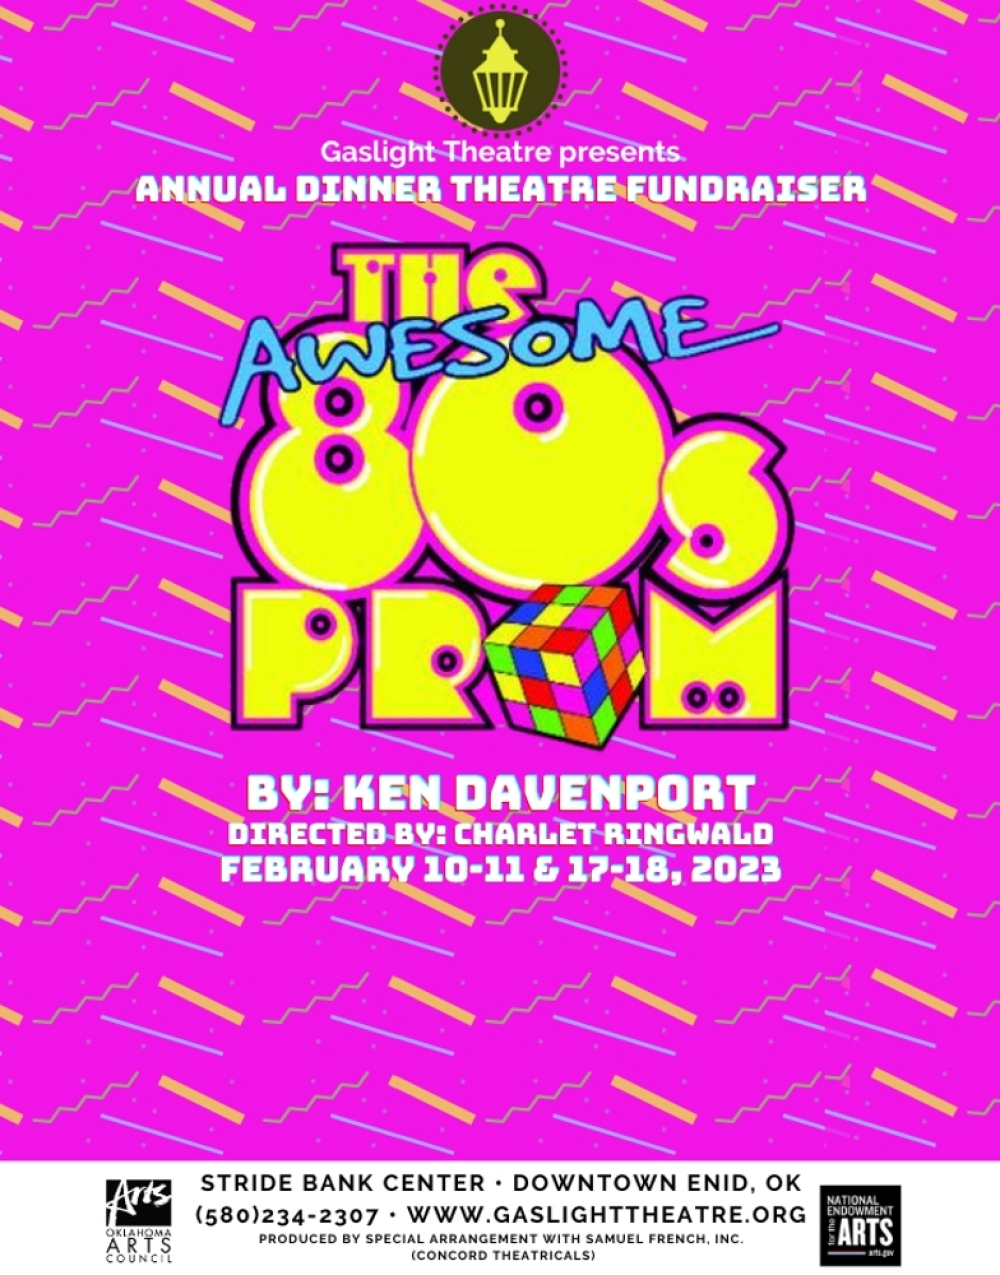 The Awesome 80s Prom at Gaslight Theatre